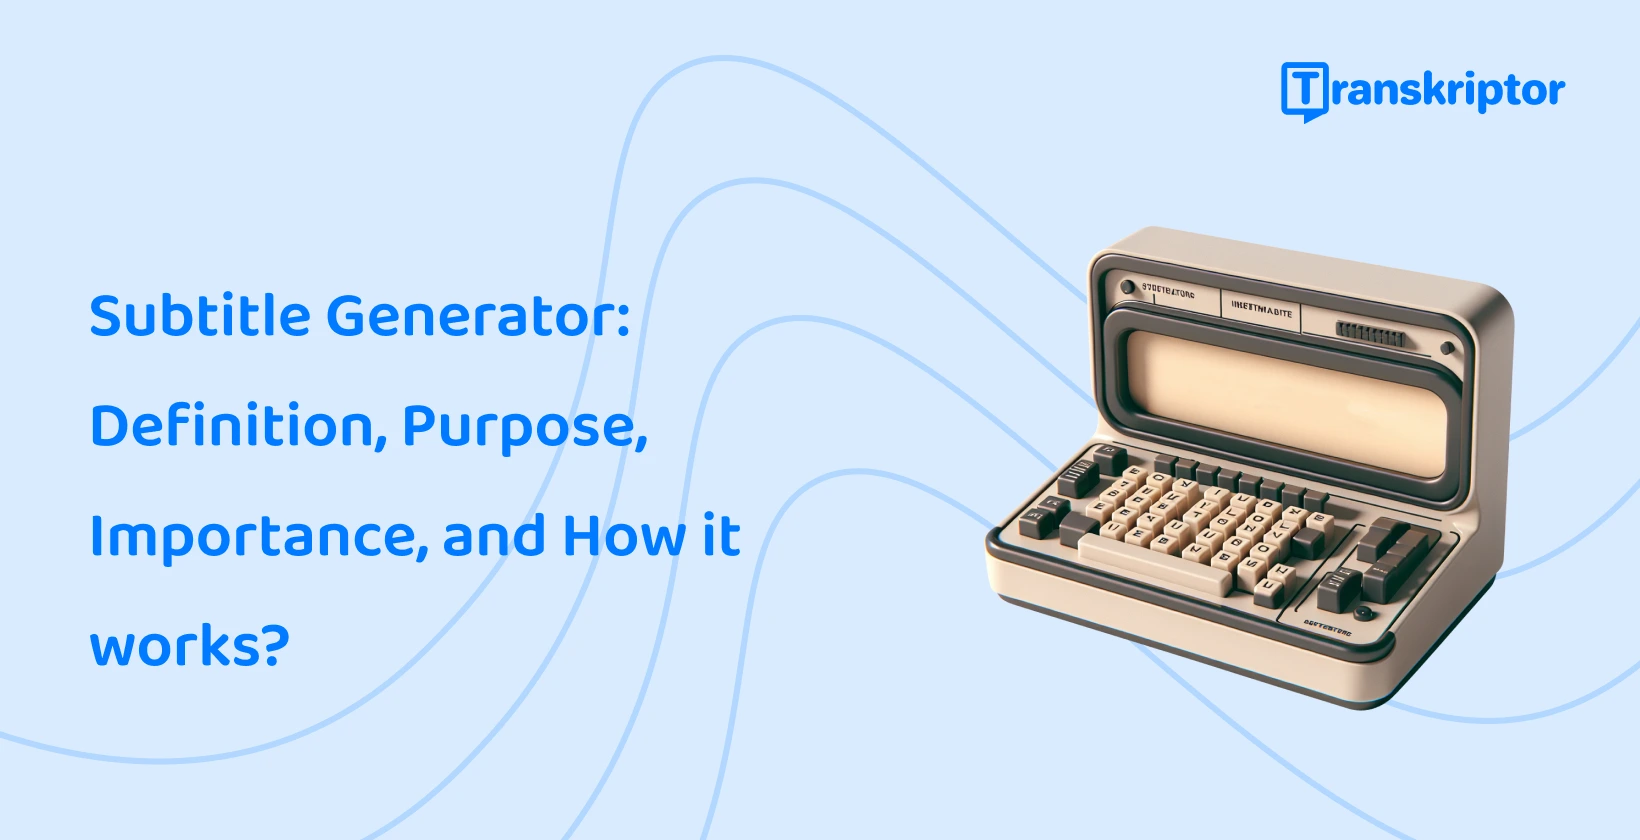 Transkriptor’s automatic subtitle generation is respresented by vintage typewriter, easy and free online use.